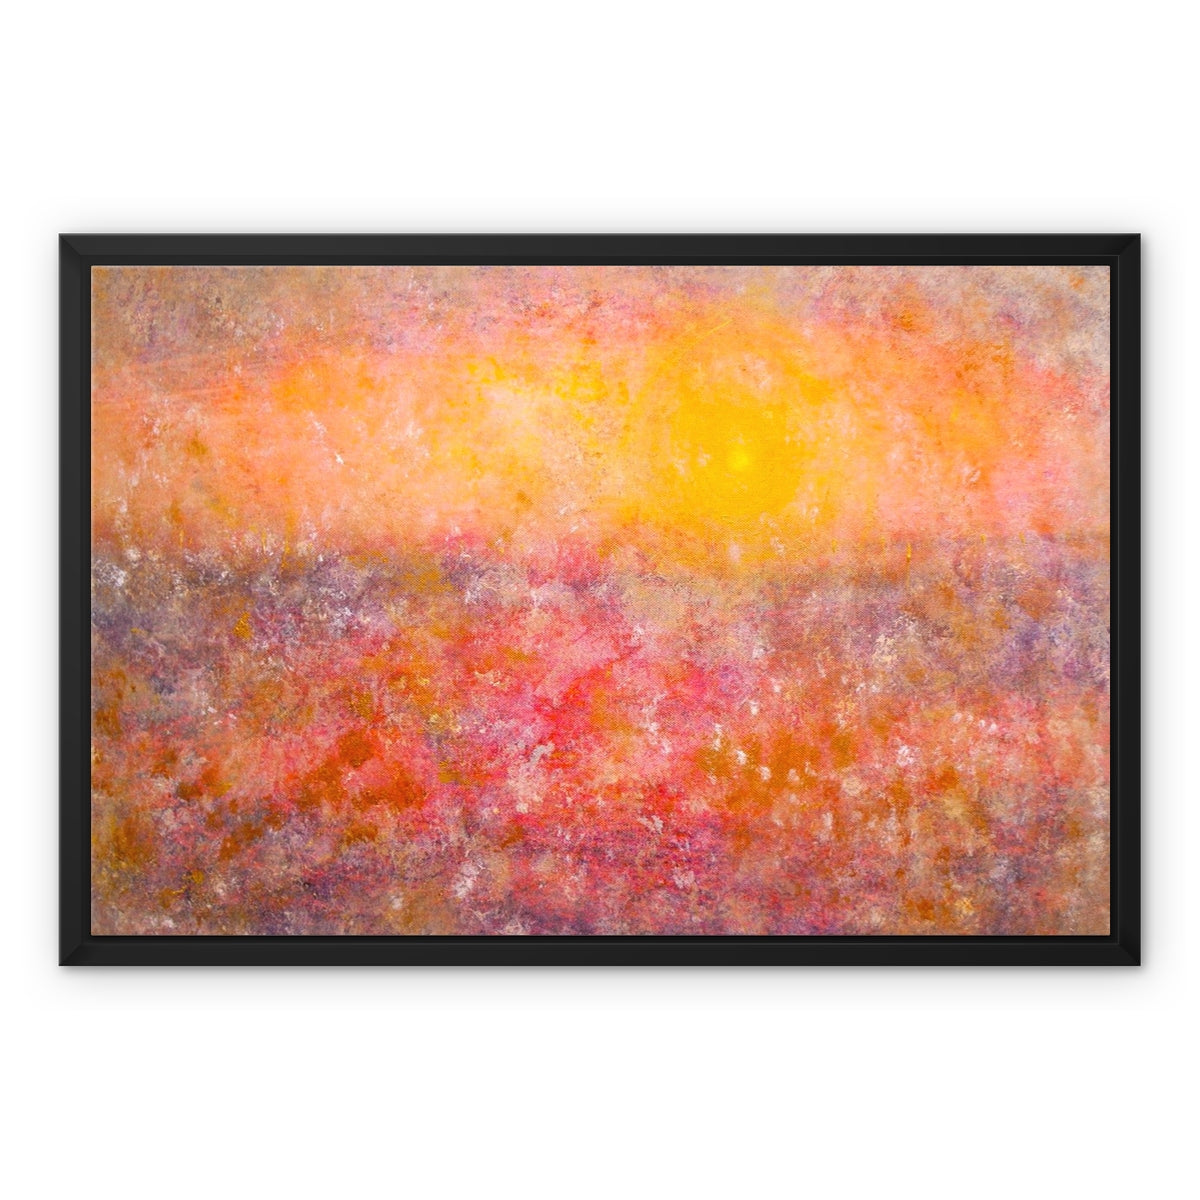 Sunrise Mist Horizon Abstract Painting | Framed Canvas From Scotland-Floating Framed Canvas Prints-Abstract & Impressionistic Art Gallery-24"x18"-Paintings, Prints, Homeware, Art Gifts From Scotland By Scottish Artist Kevin Hunter